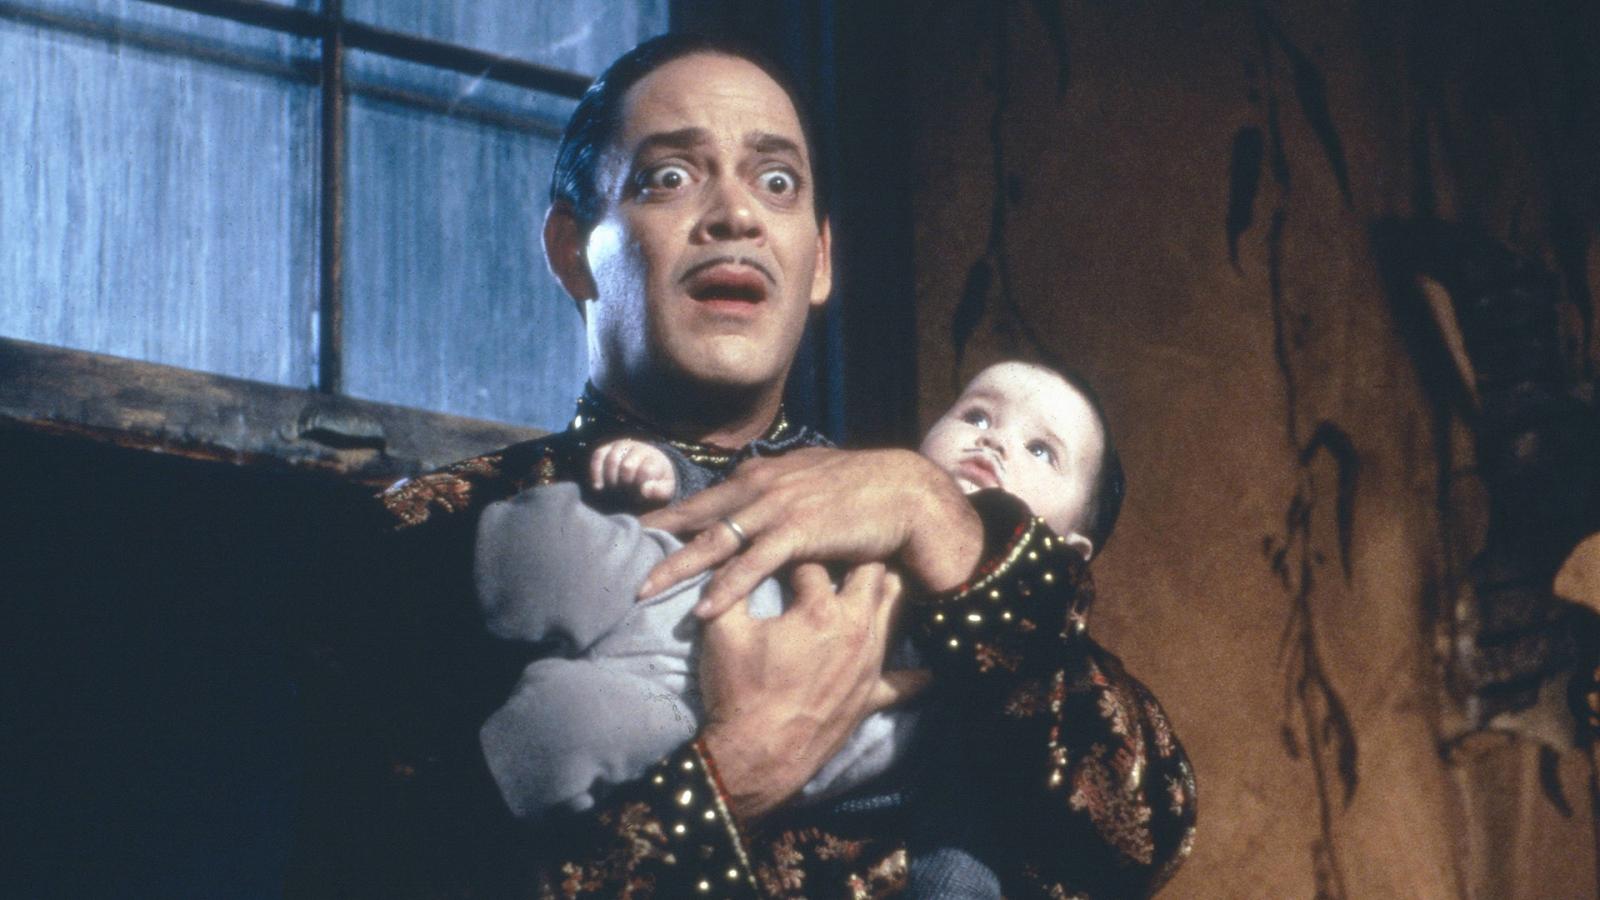 The 15 Best Movies To Watch With Family on Halloween, Ranked - image 5